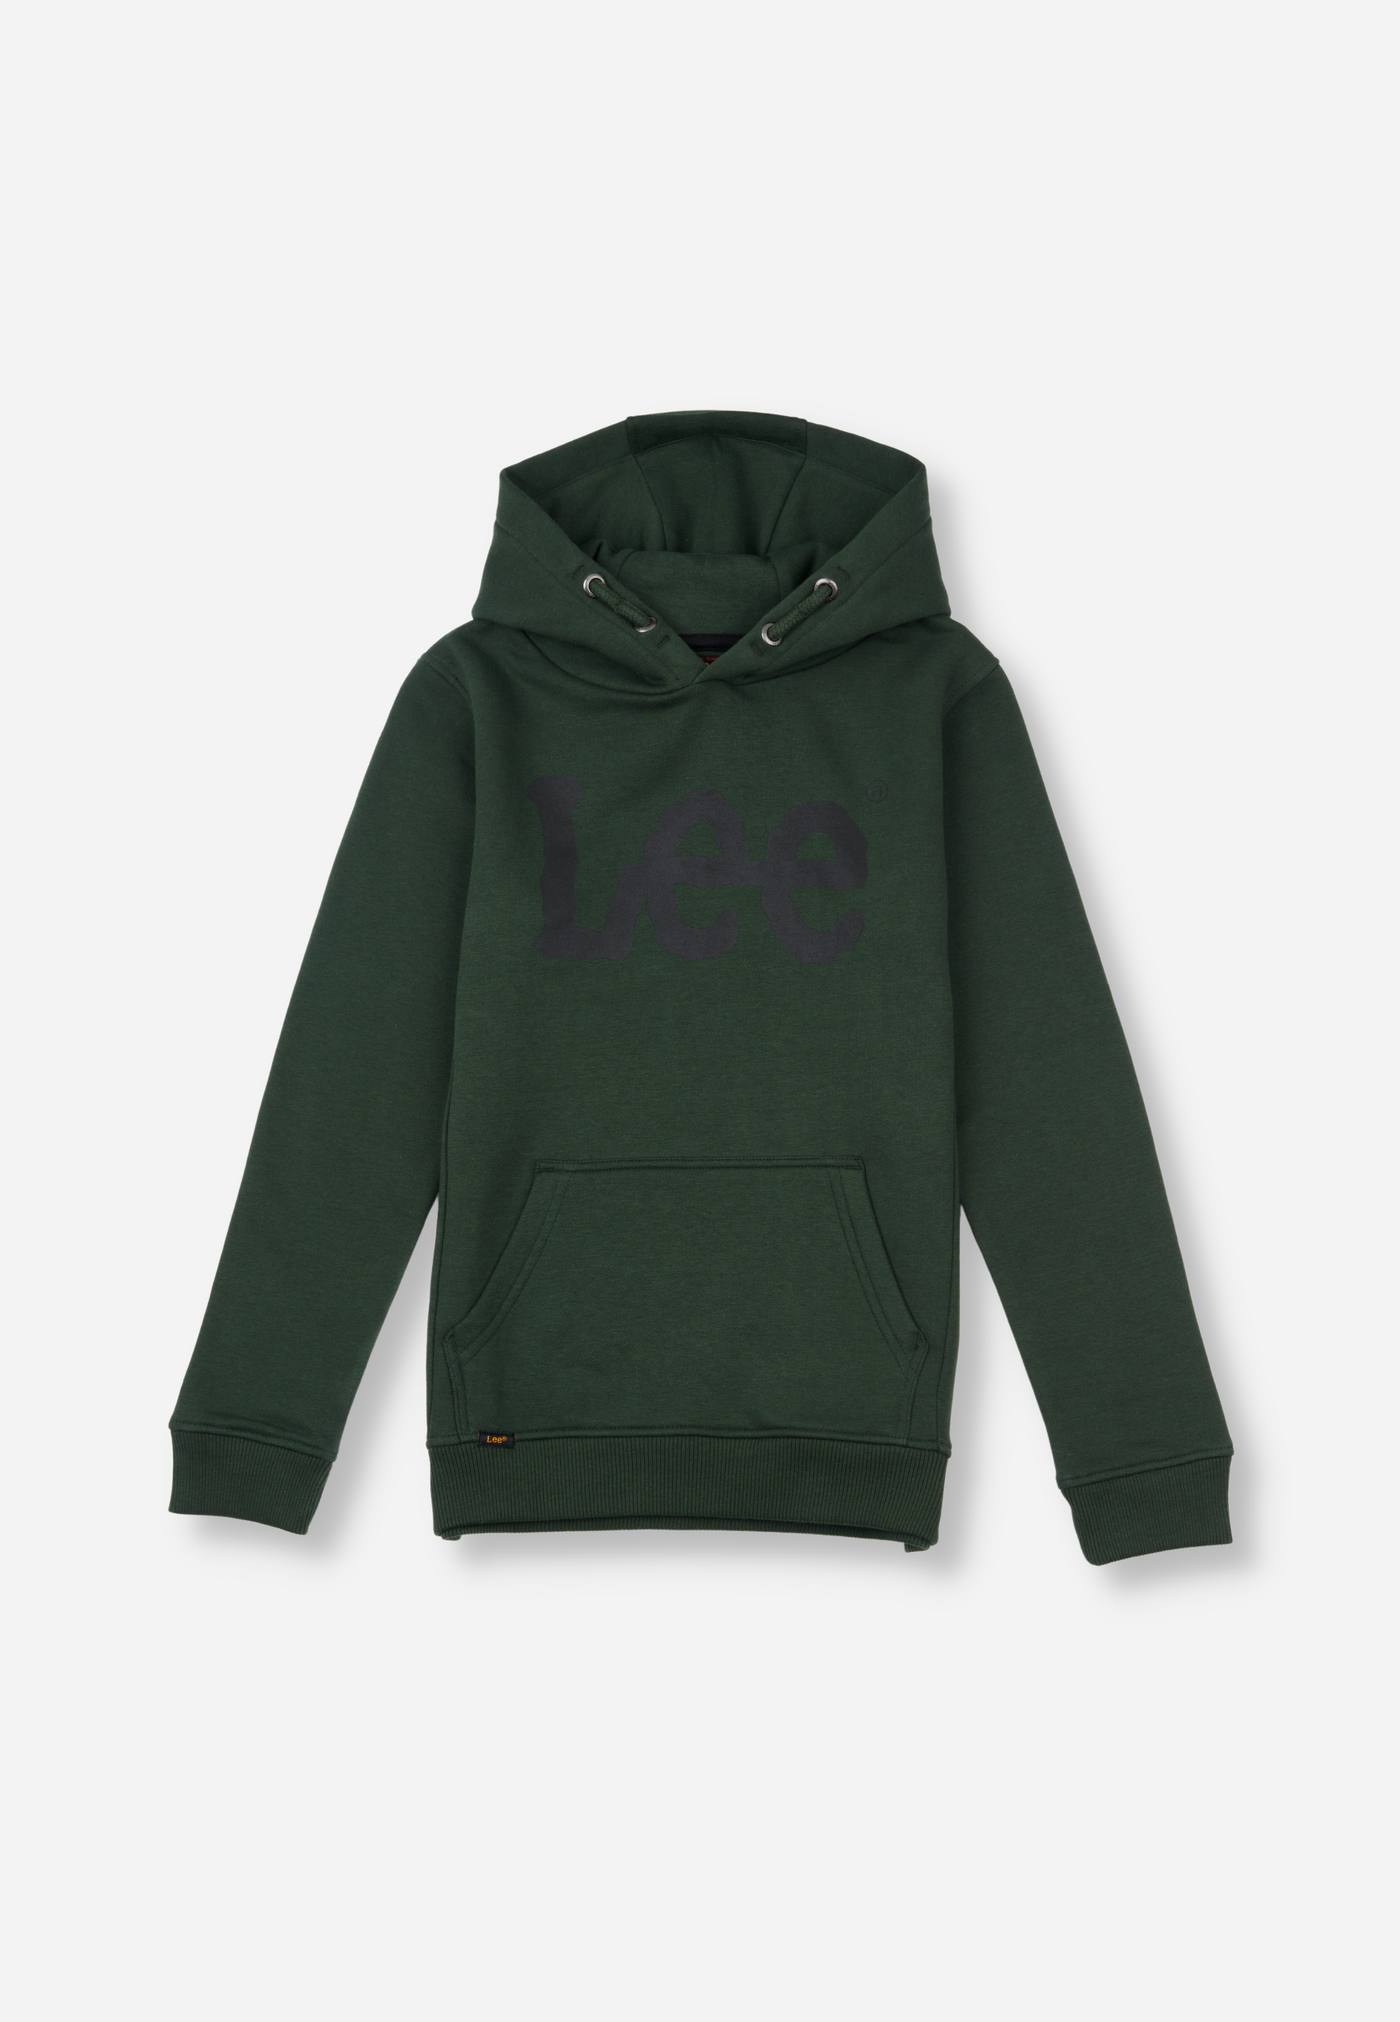 WOBBLY GRAPHIC BB HOODIE - DEEP FOREST